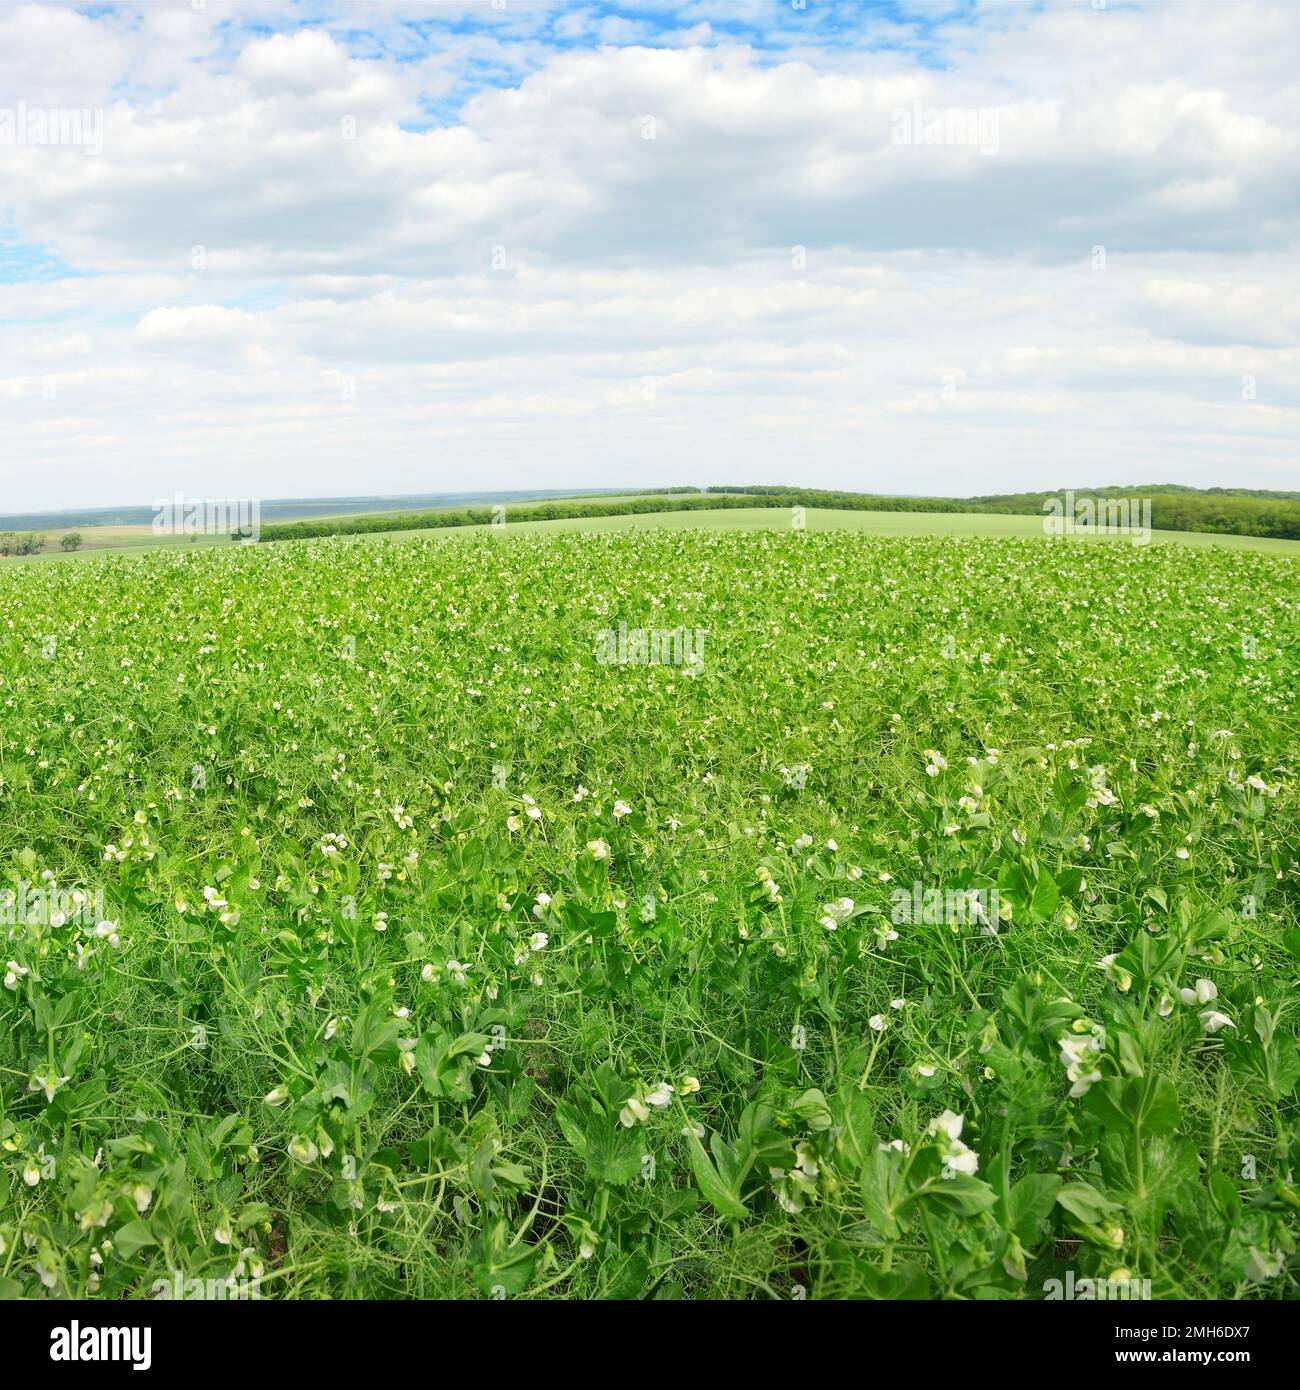 Pea field and blue sky Stock Photo